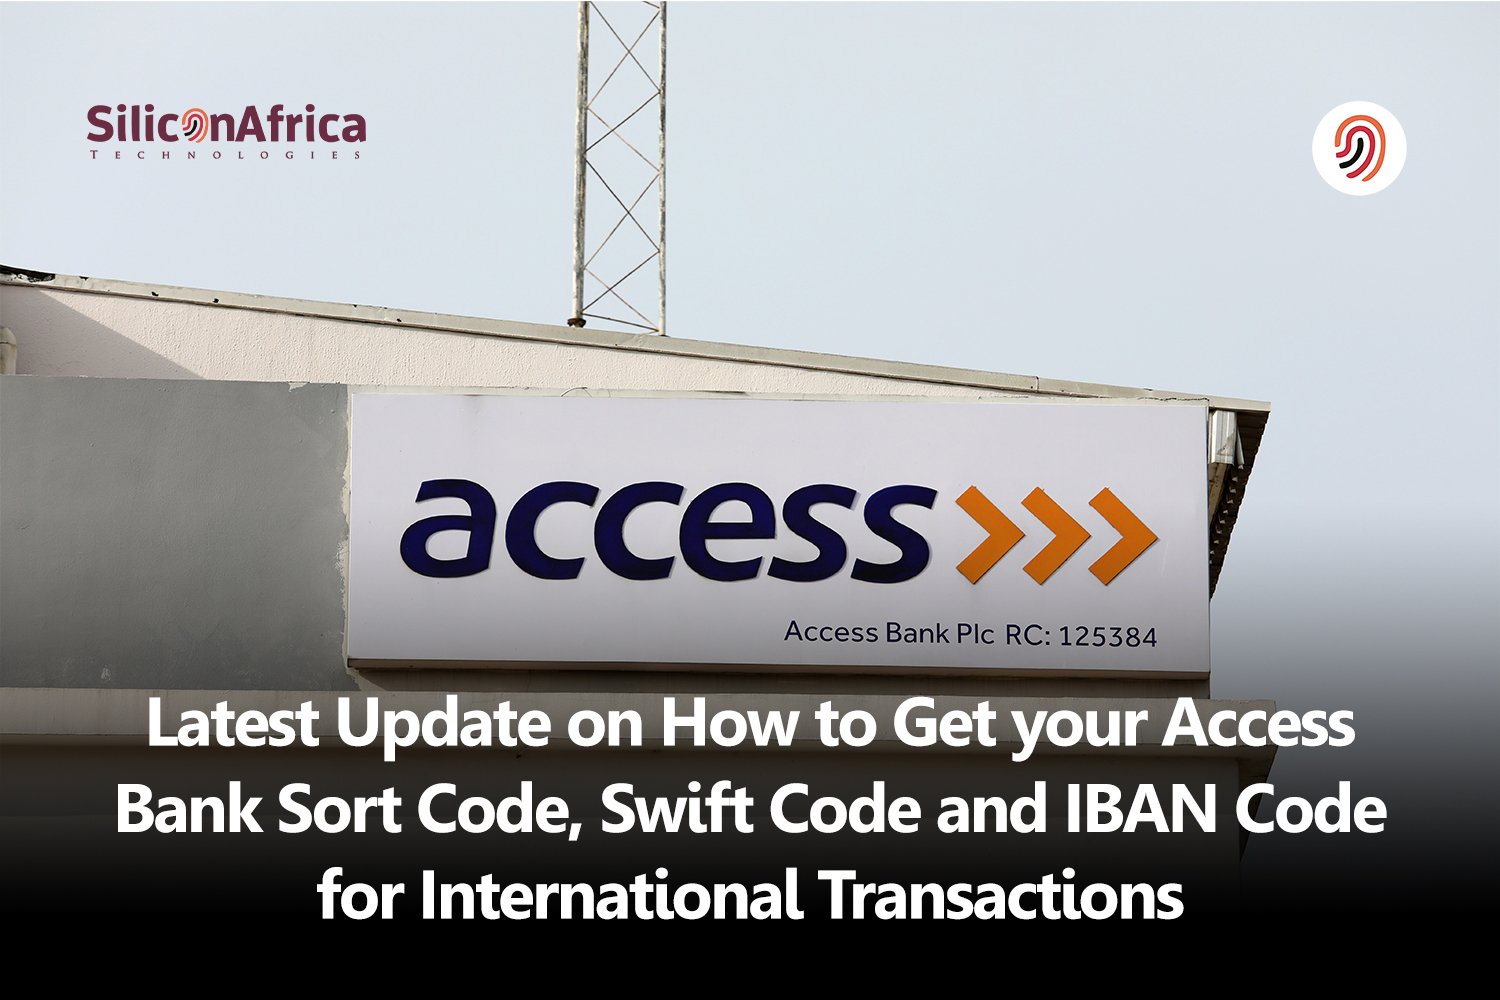 Latest Update on How to Get Your Access Bank Sort Code, Swift Code and IBAN Code for International Transactions